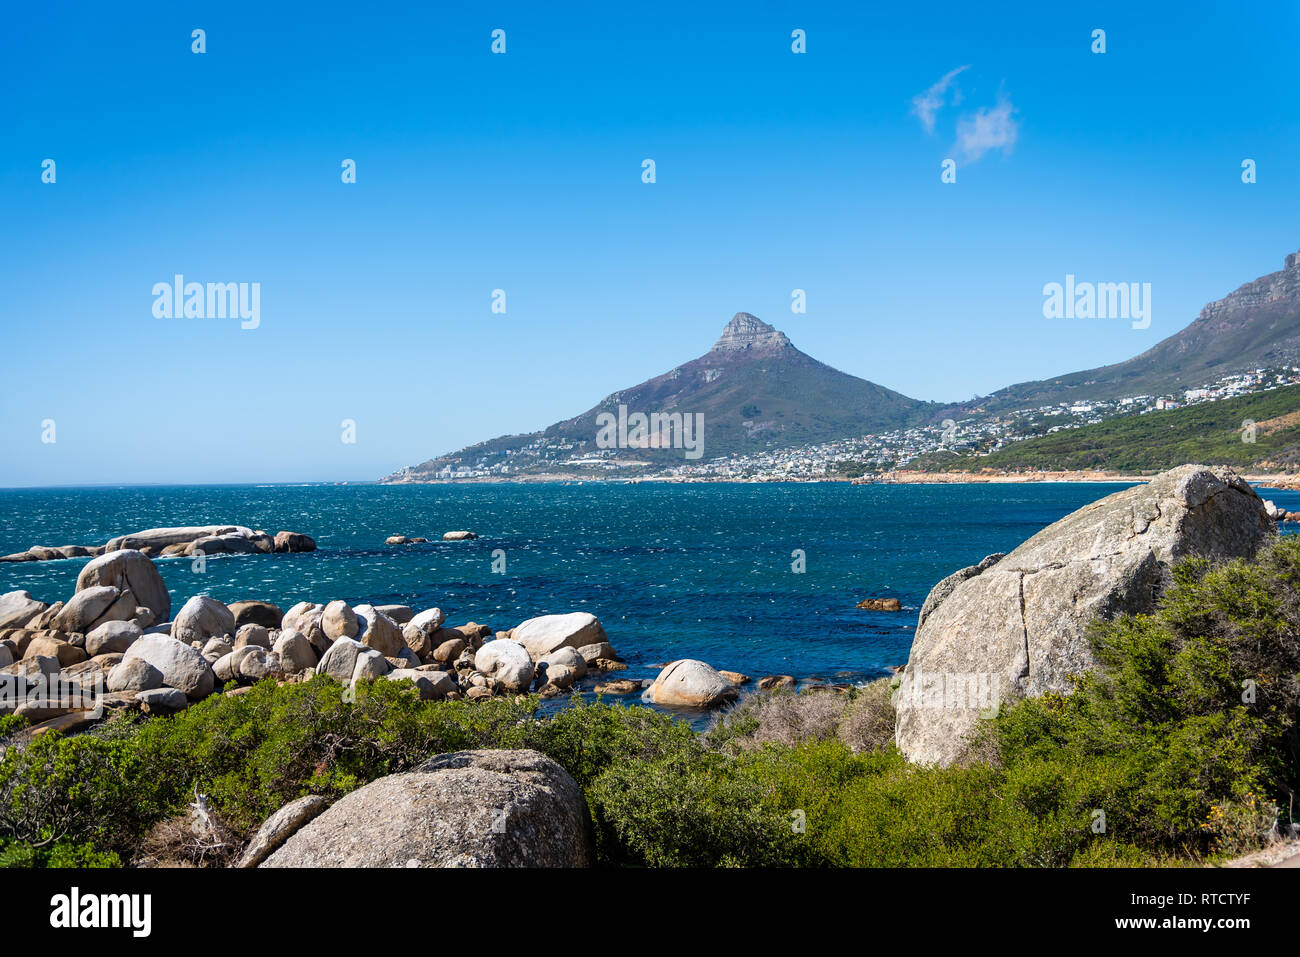 The shoreline in Cape Town, South Africa Stock Photo